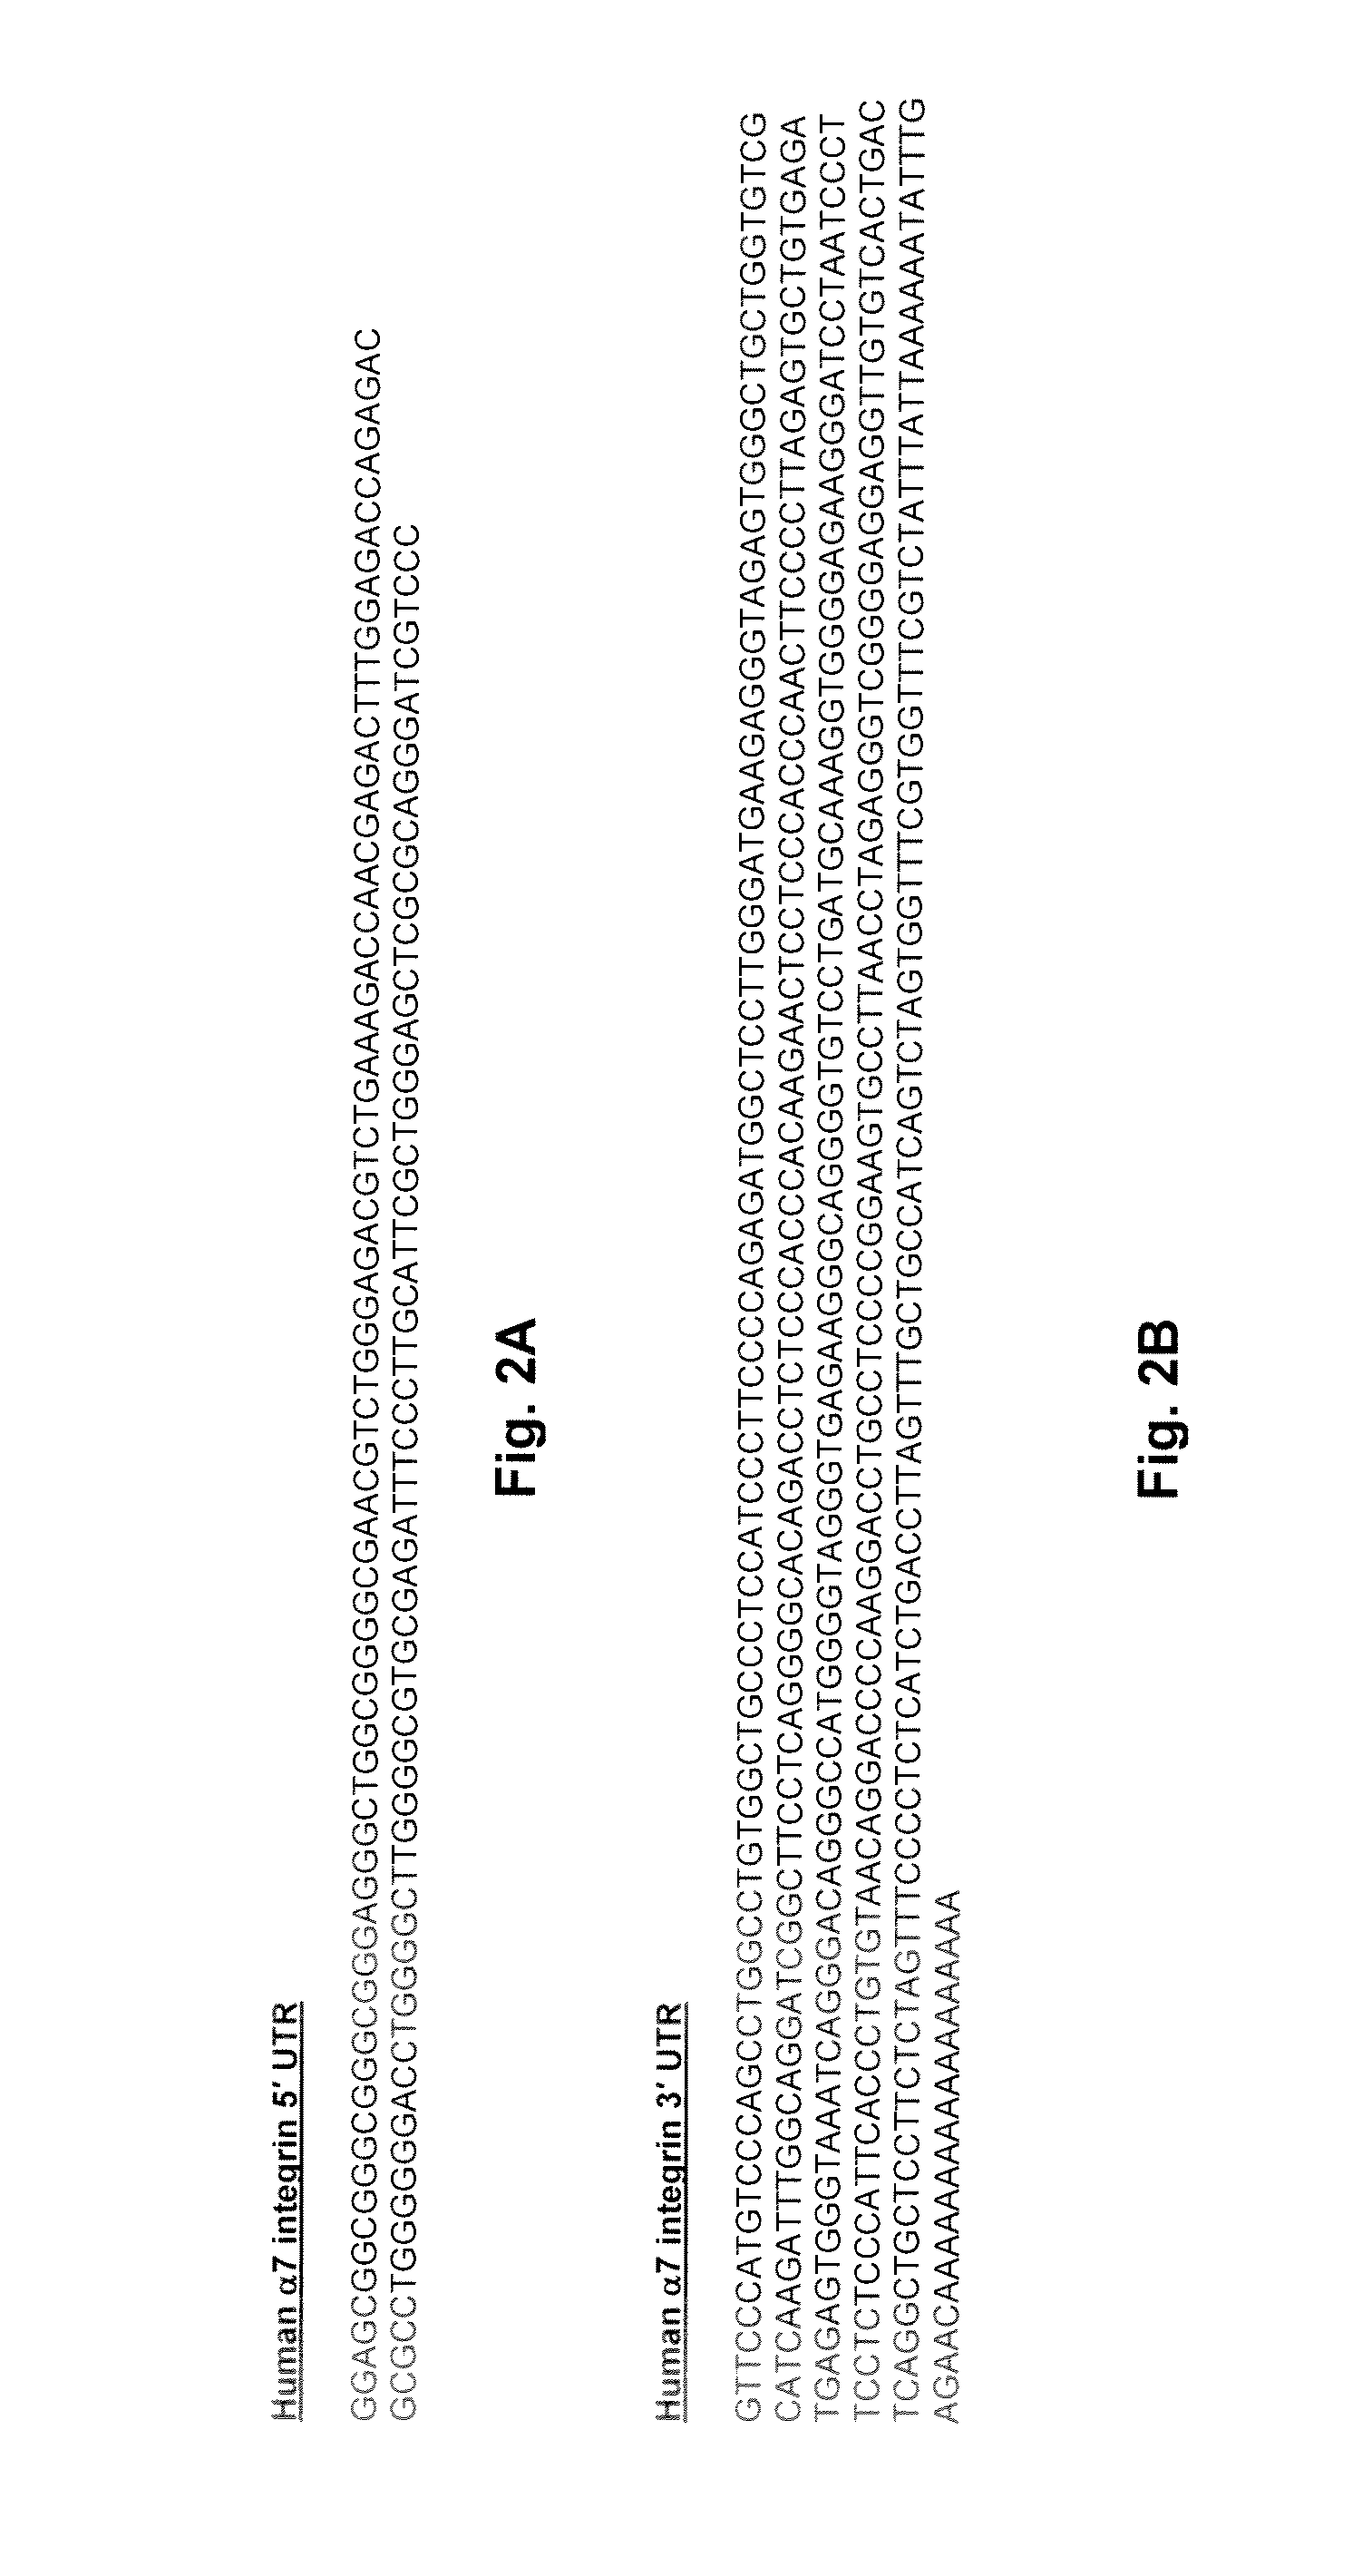 Methods of screening for compounds for treating muscular dystrophy using mIGF1 mRNA translation regulation